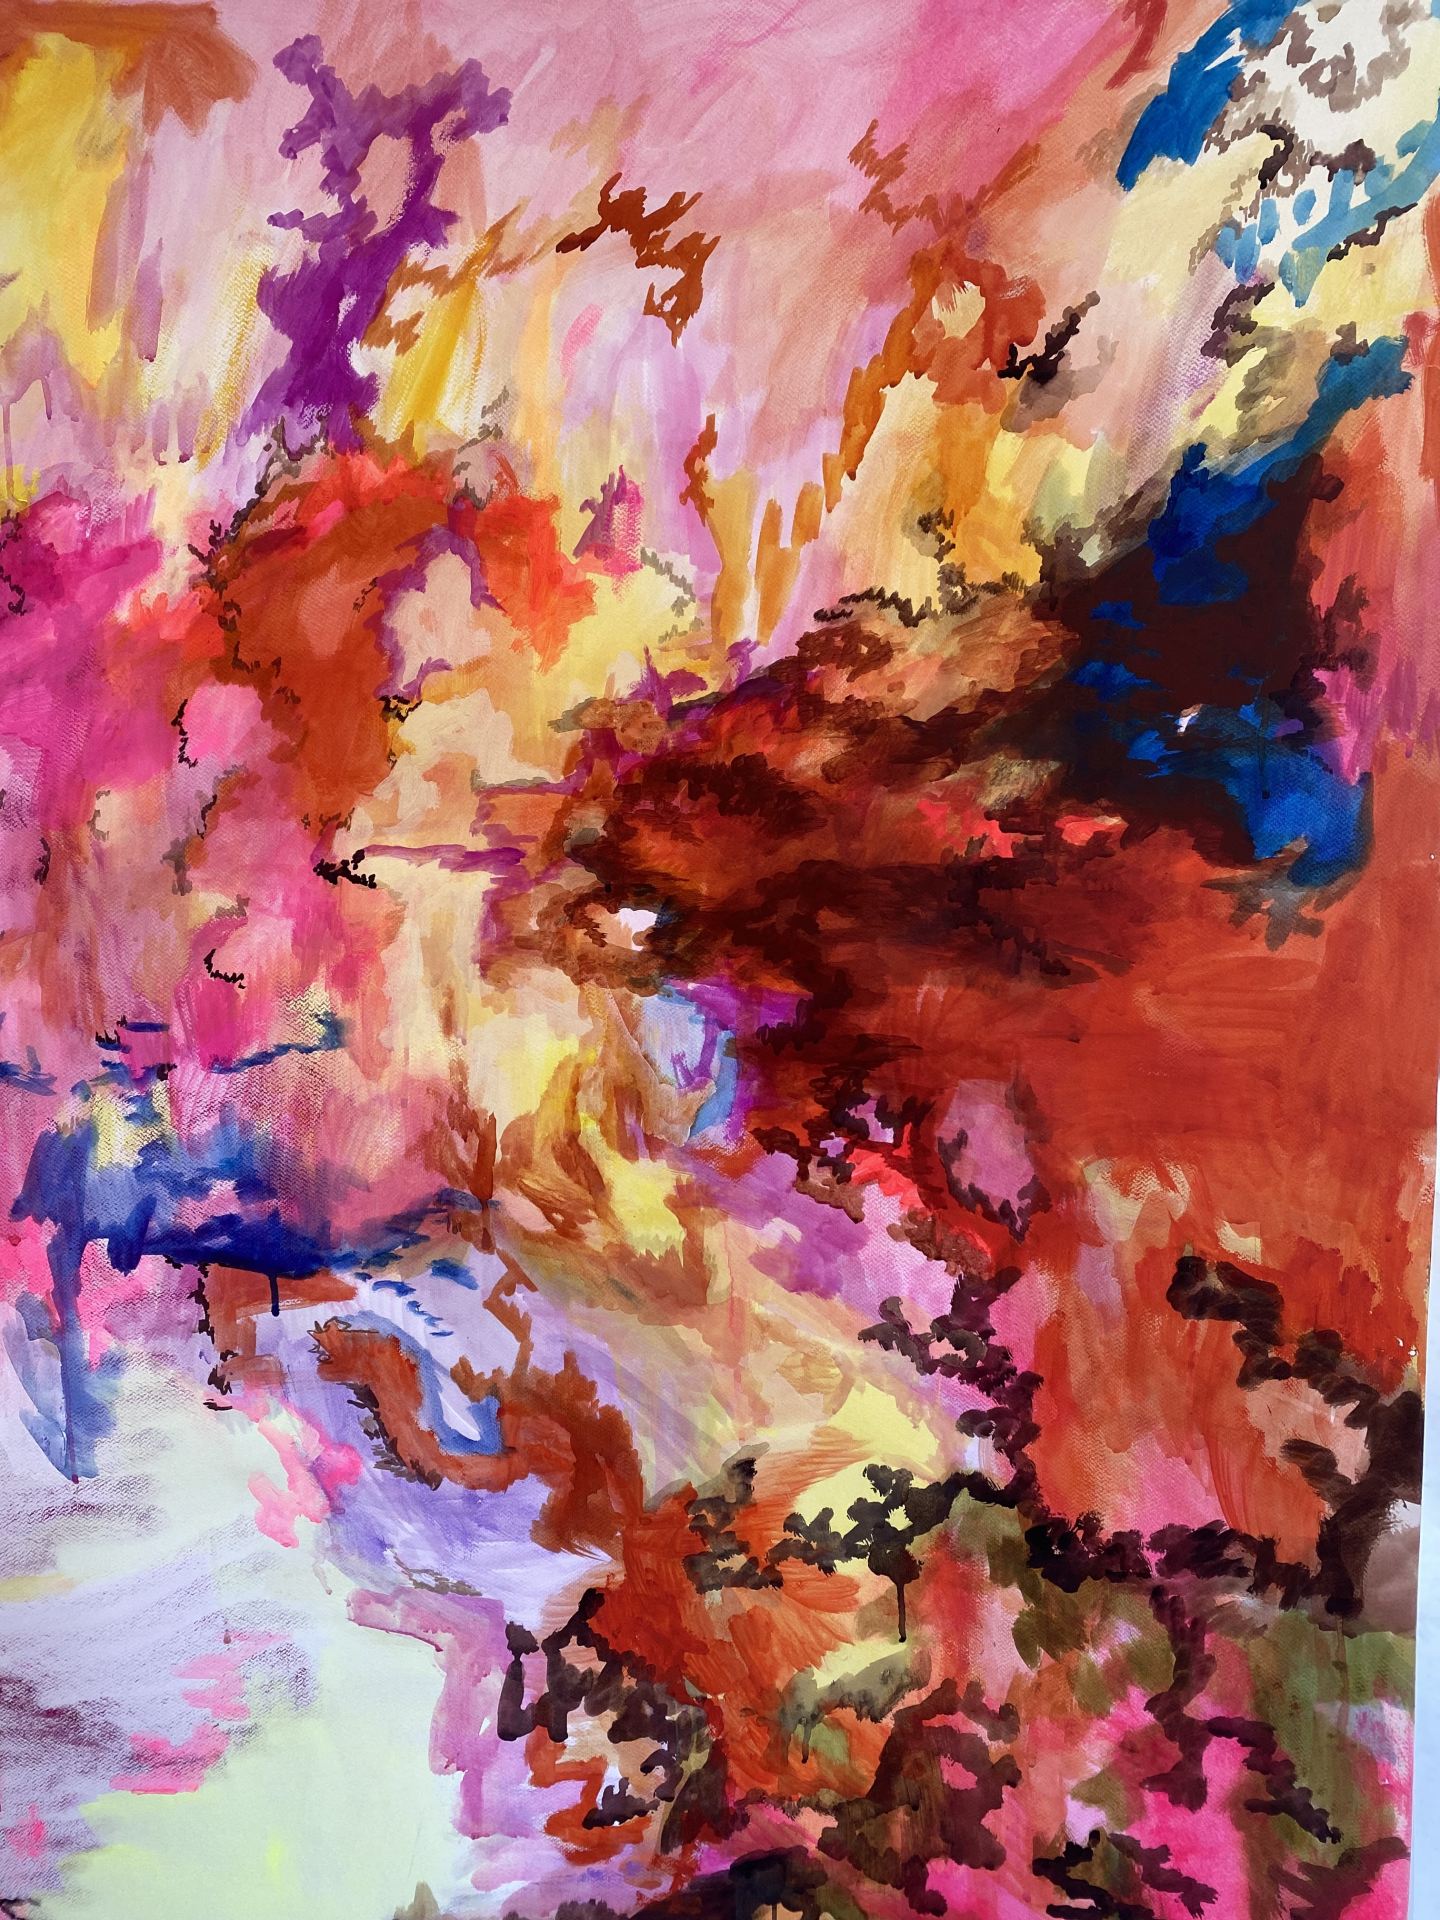 A colourful, abstract painting.